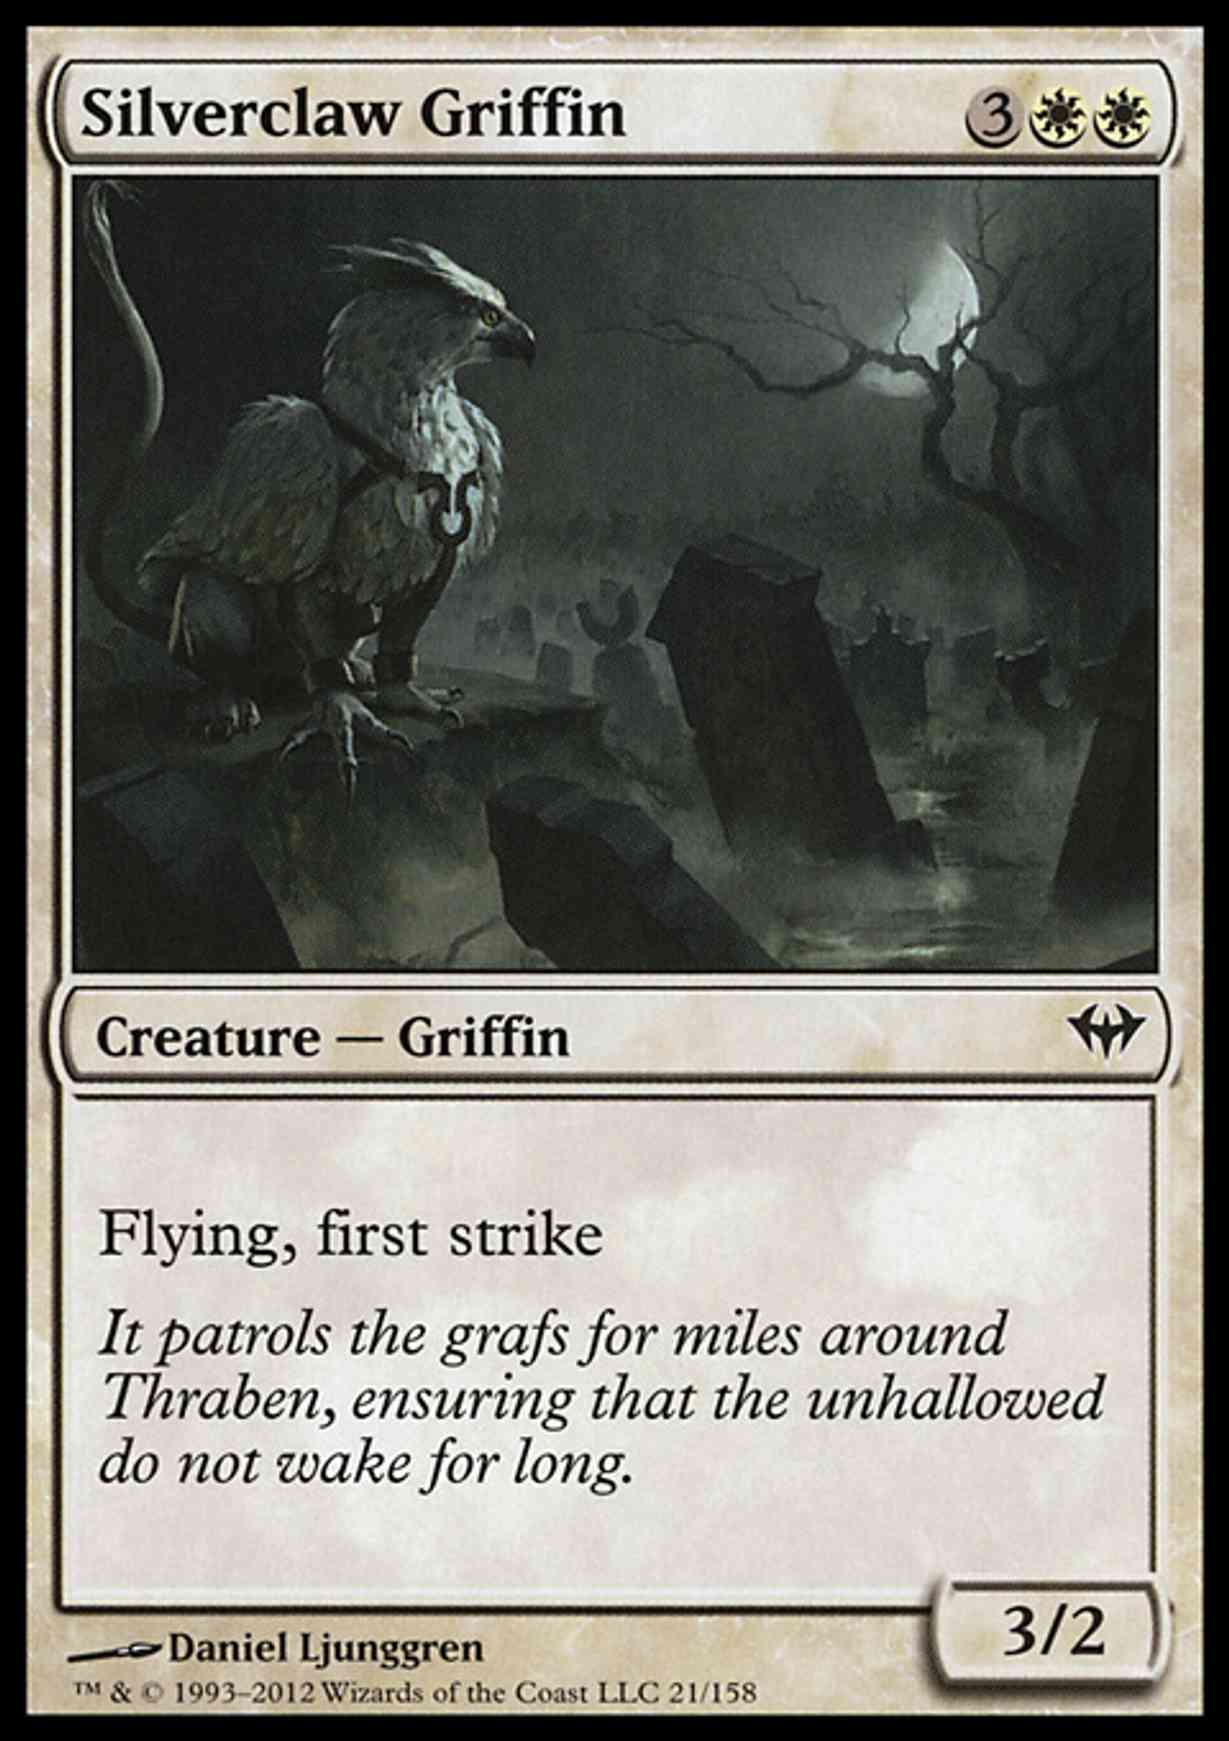 Silverclaw Griffin magic card front